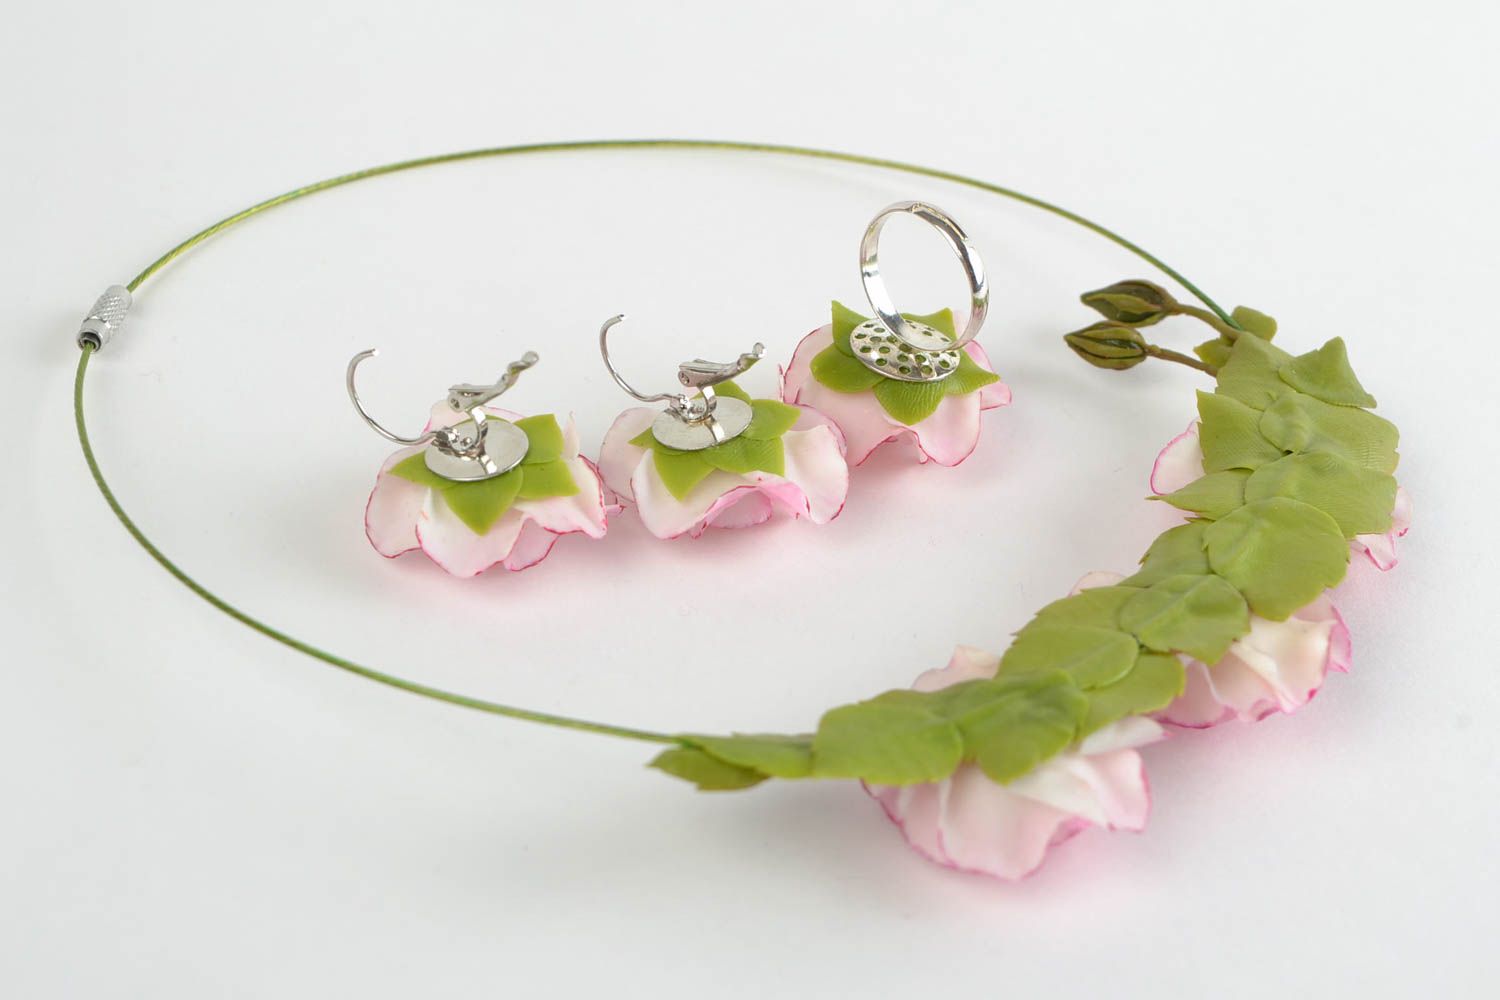 Cold porcelain flower jewelry set 3 pieces handmade earrings necklace and ring photo 5